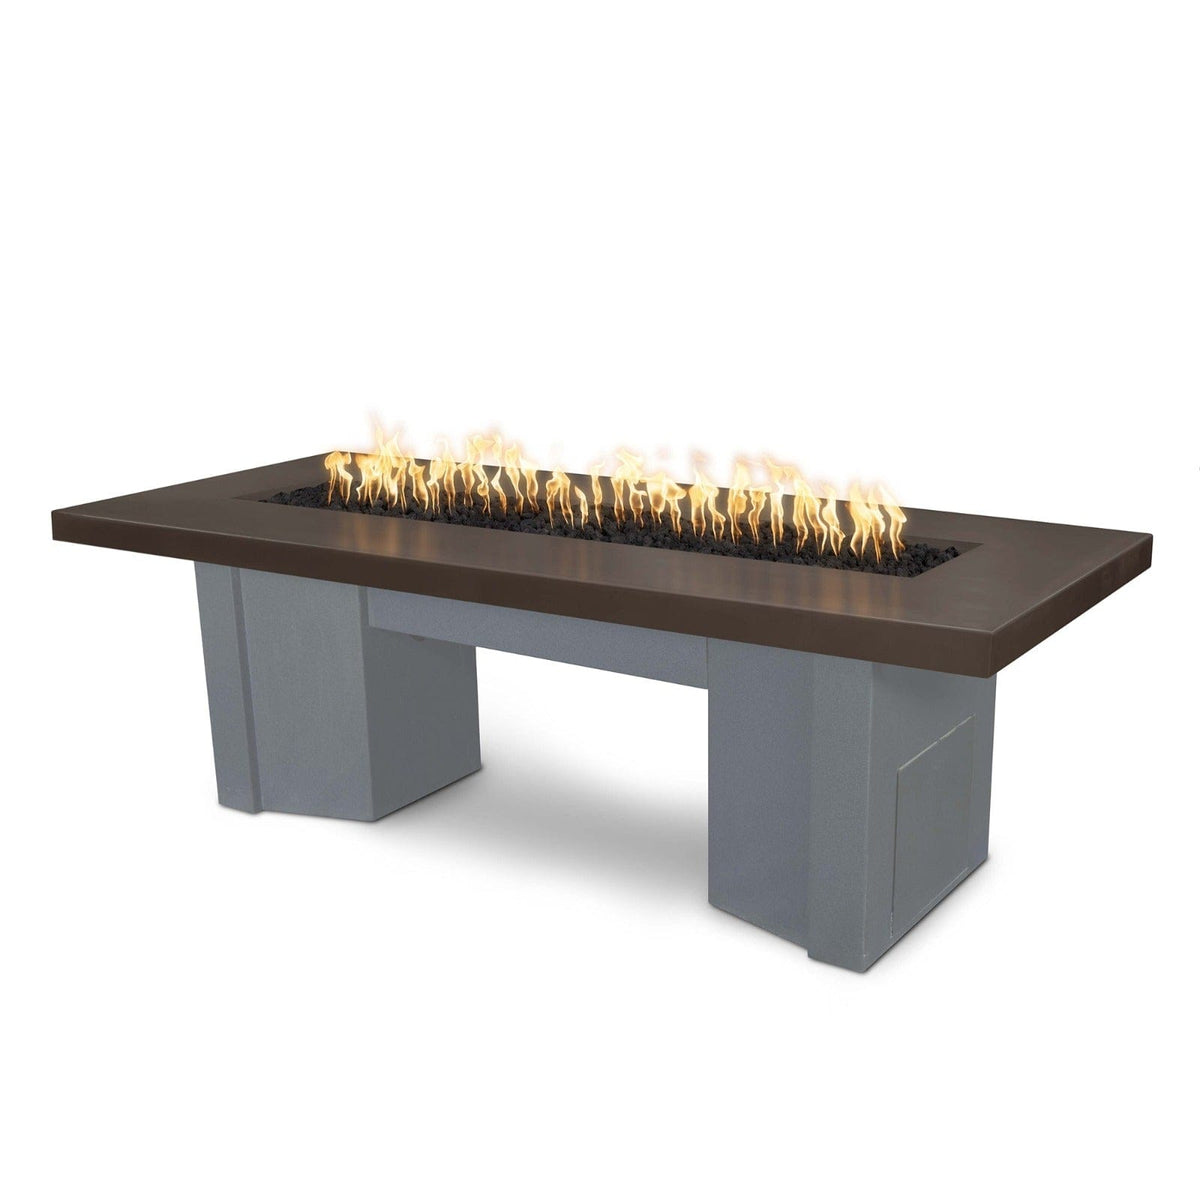 The Outdoor Plus Fire Features Chocolate (-CHC) / Gray Powder Coated Steel (-GRY) The Outdoor Plus 78&quot; Alameda Fire Table Smooth Concrete in Liquid Propane - Flame Sense System with Push Button Spark Igniter / OPT-ALMGFRC78FSEN-LP